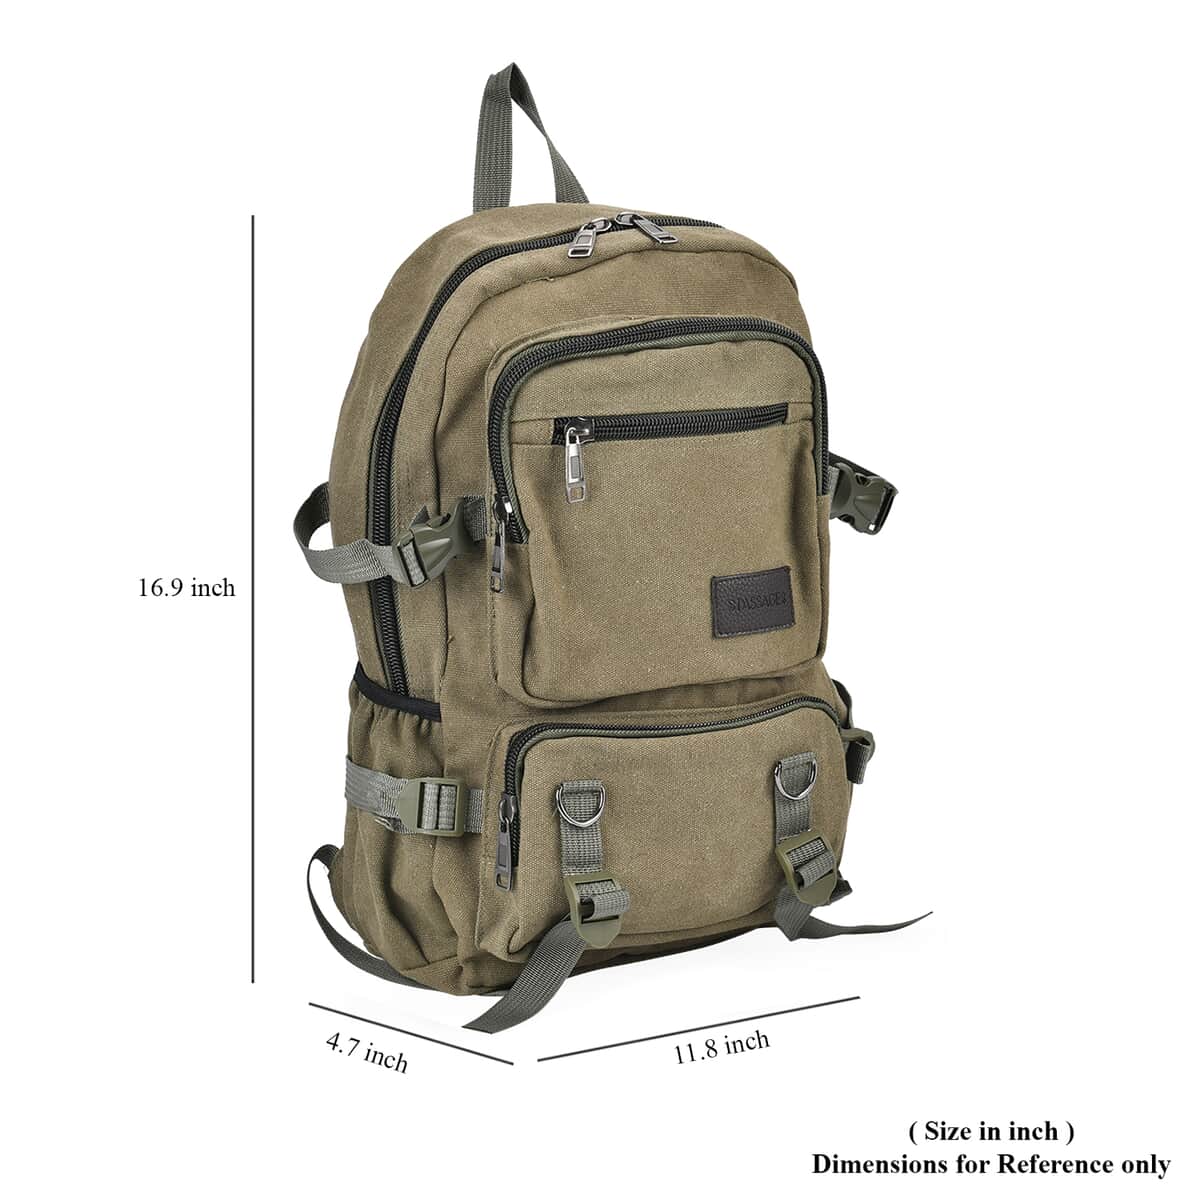 Navy Collection Army Green Multiple Pockets Backpack Bag (11.8"x4.7"x16.9") with Two Padded Shoulder Straps image number 6